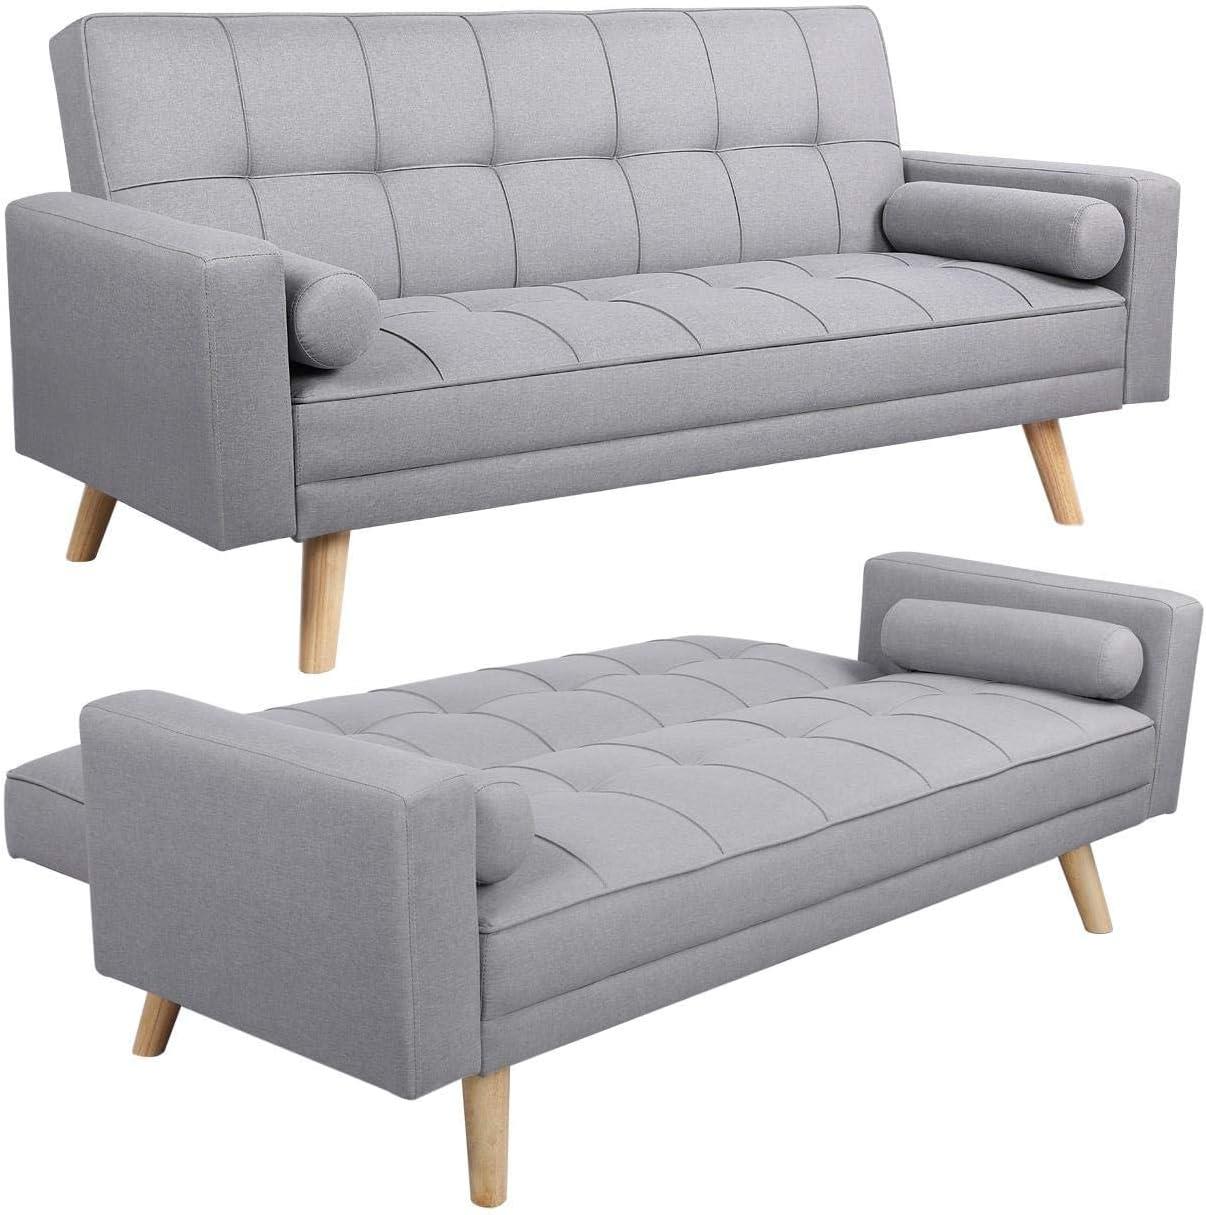 Fabric Upholstered Convertible Sofa Bed (See Description)